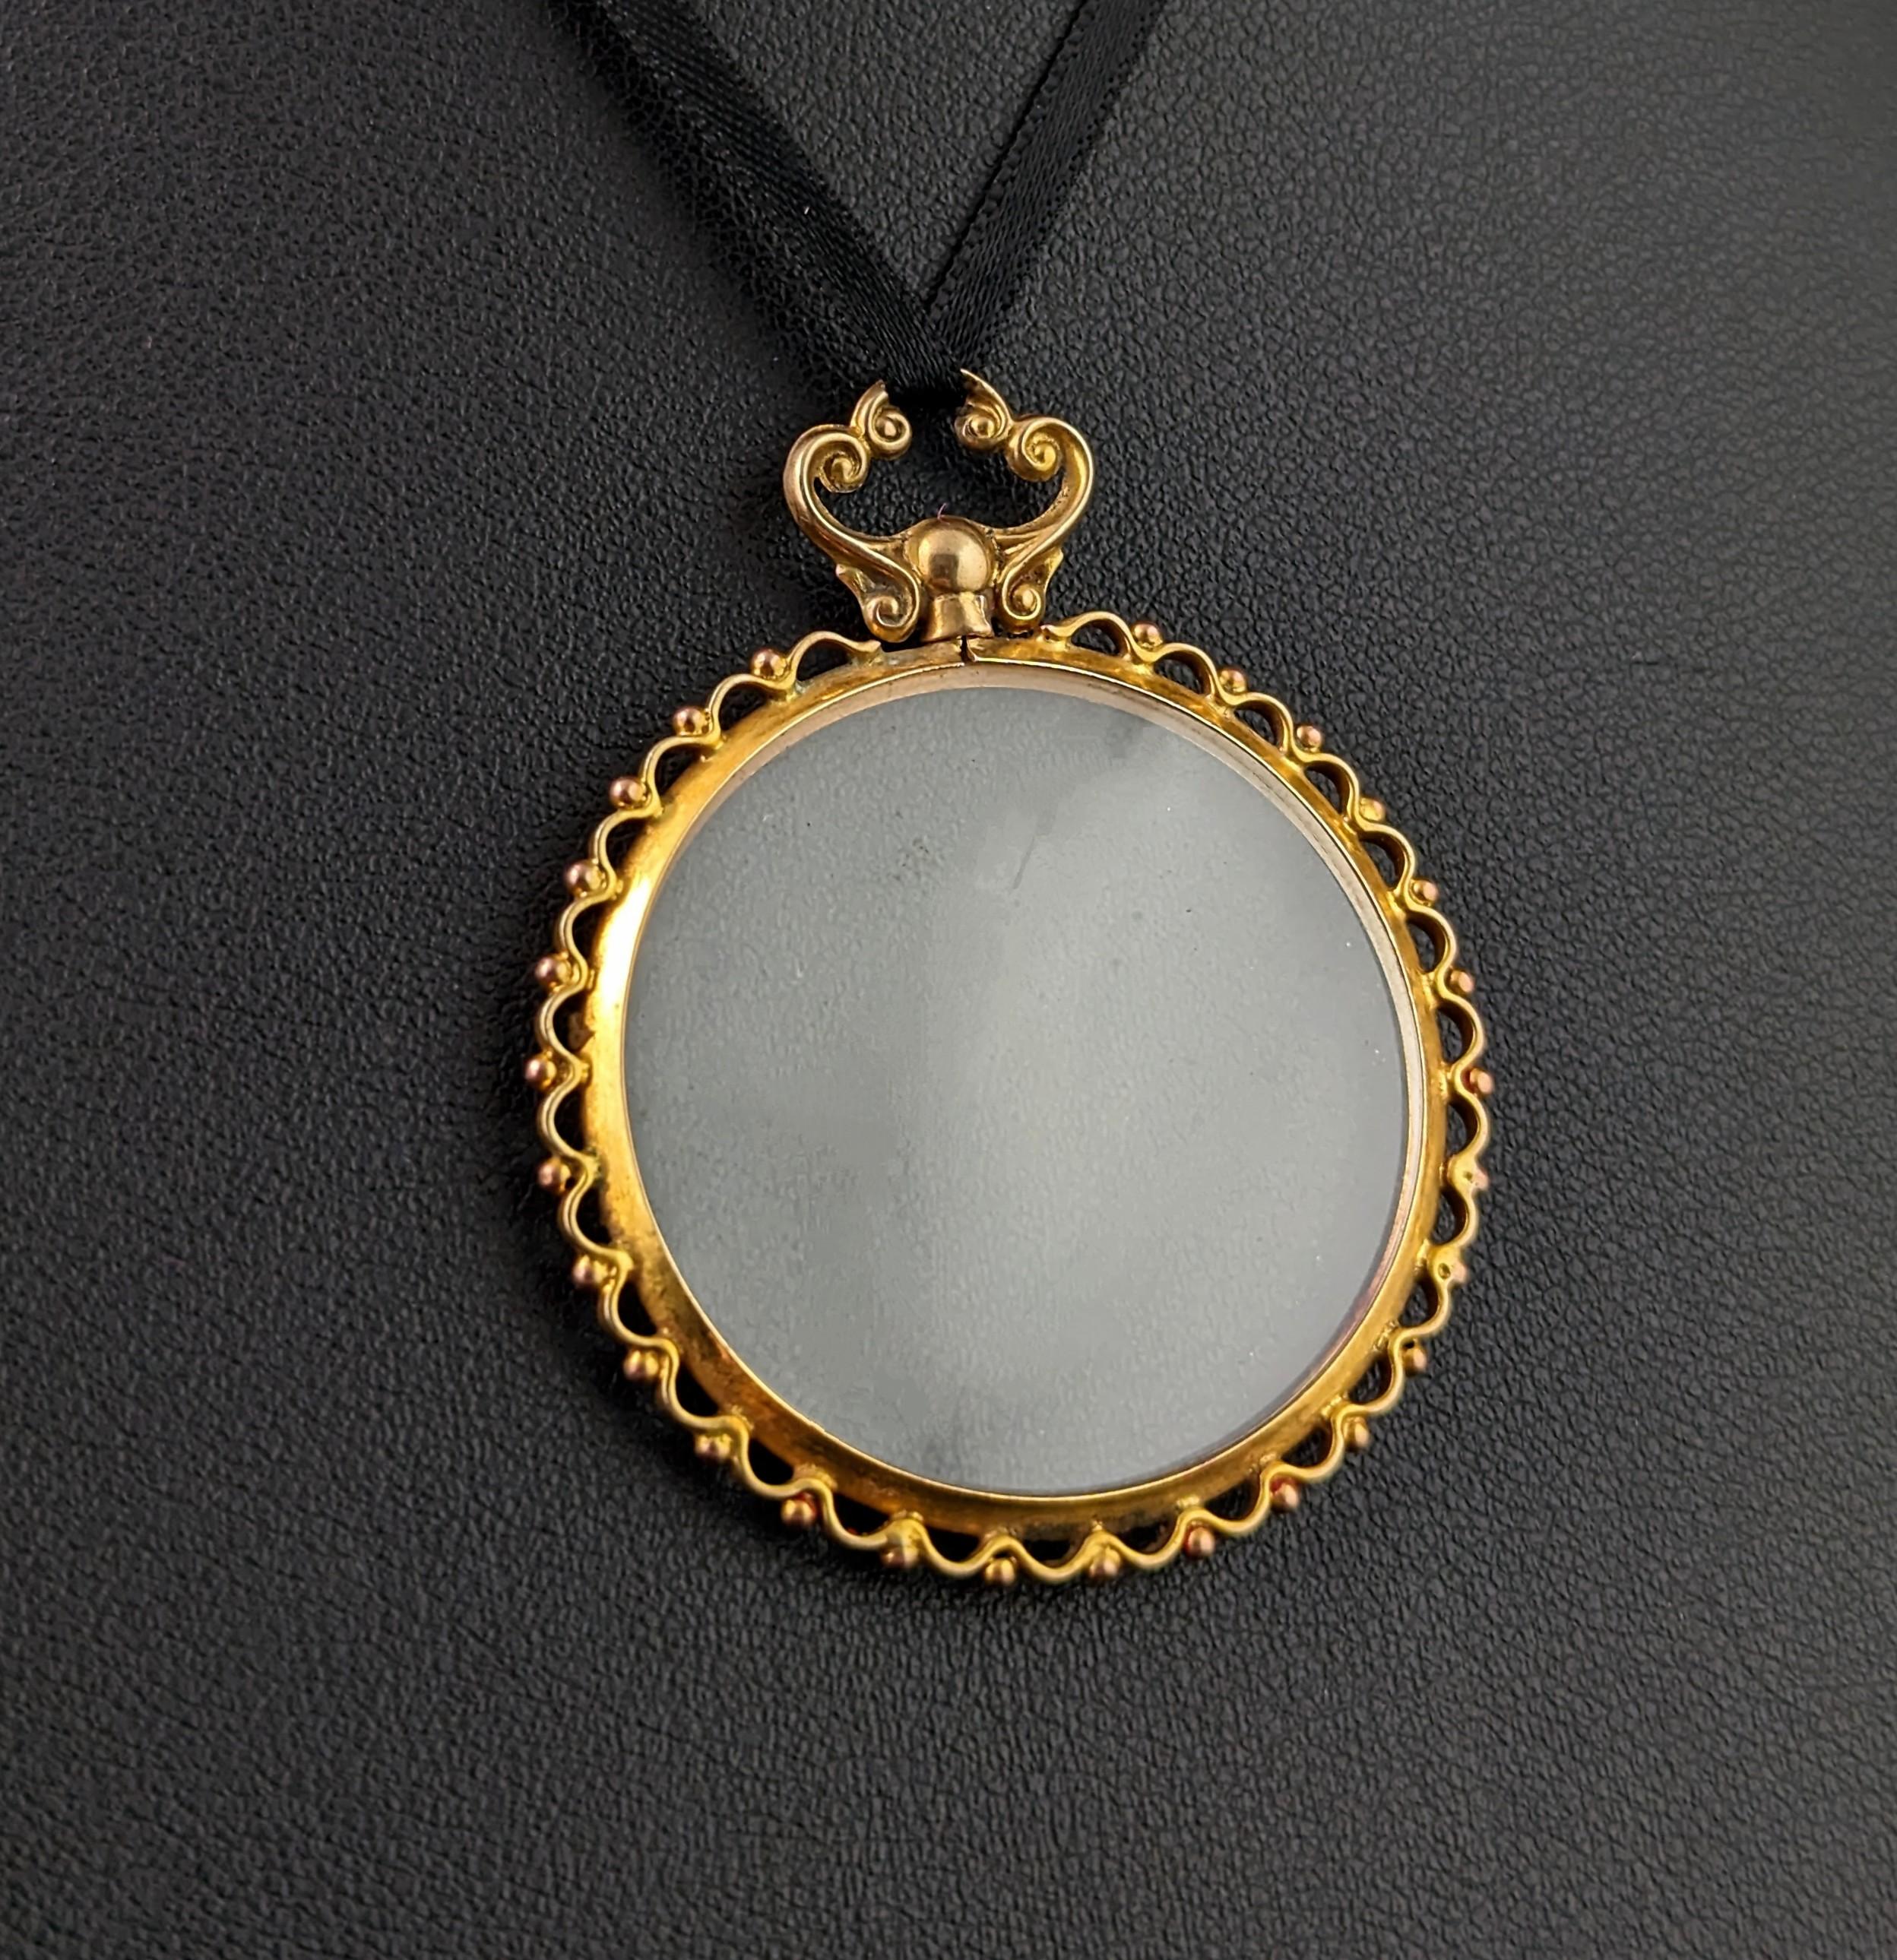 This is a truly beautiful and special locket.

What makes it special is that it is fully hallmarked with the elusive Glasgow hallmark.

Pieces with the Glasgow hallmark are always harder to find and highly sought after so to come across such a